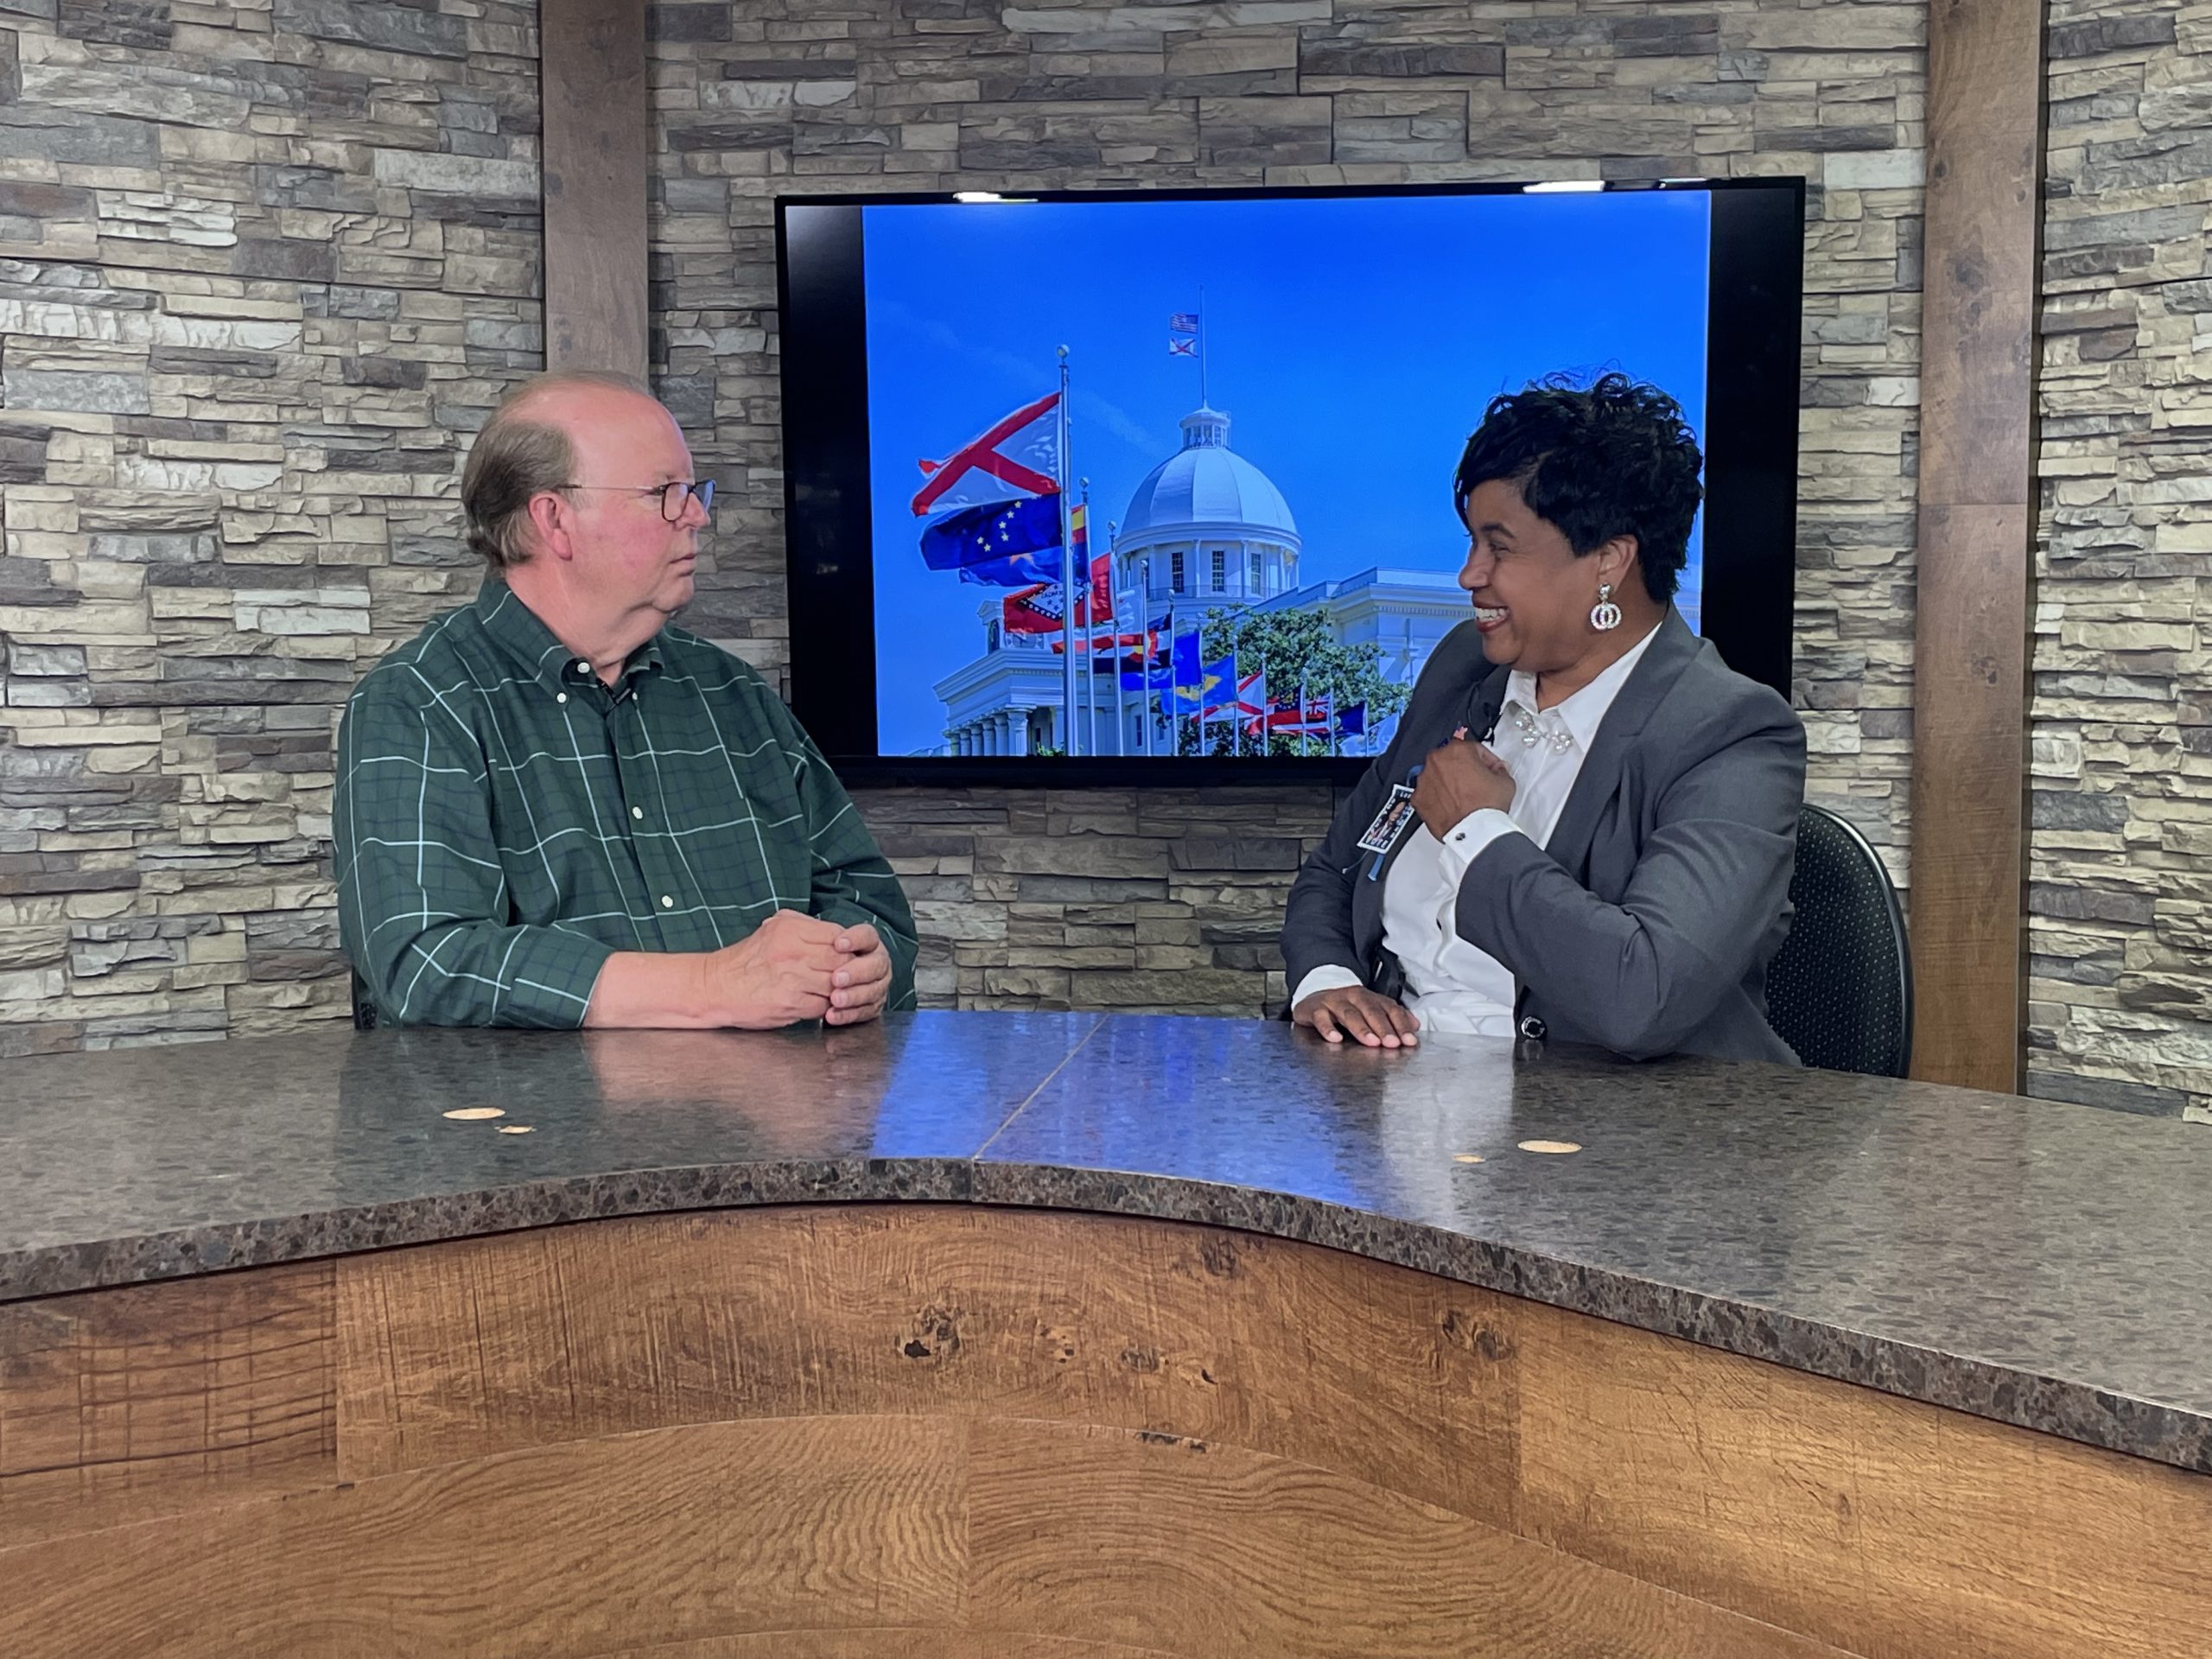 Video interview with Secretary of State Candidate Pamela Laffitte